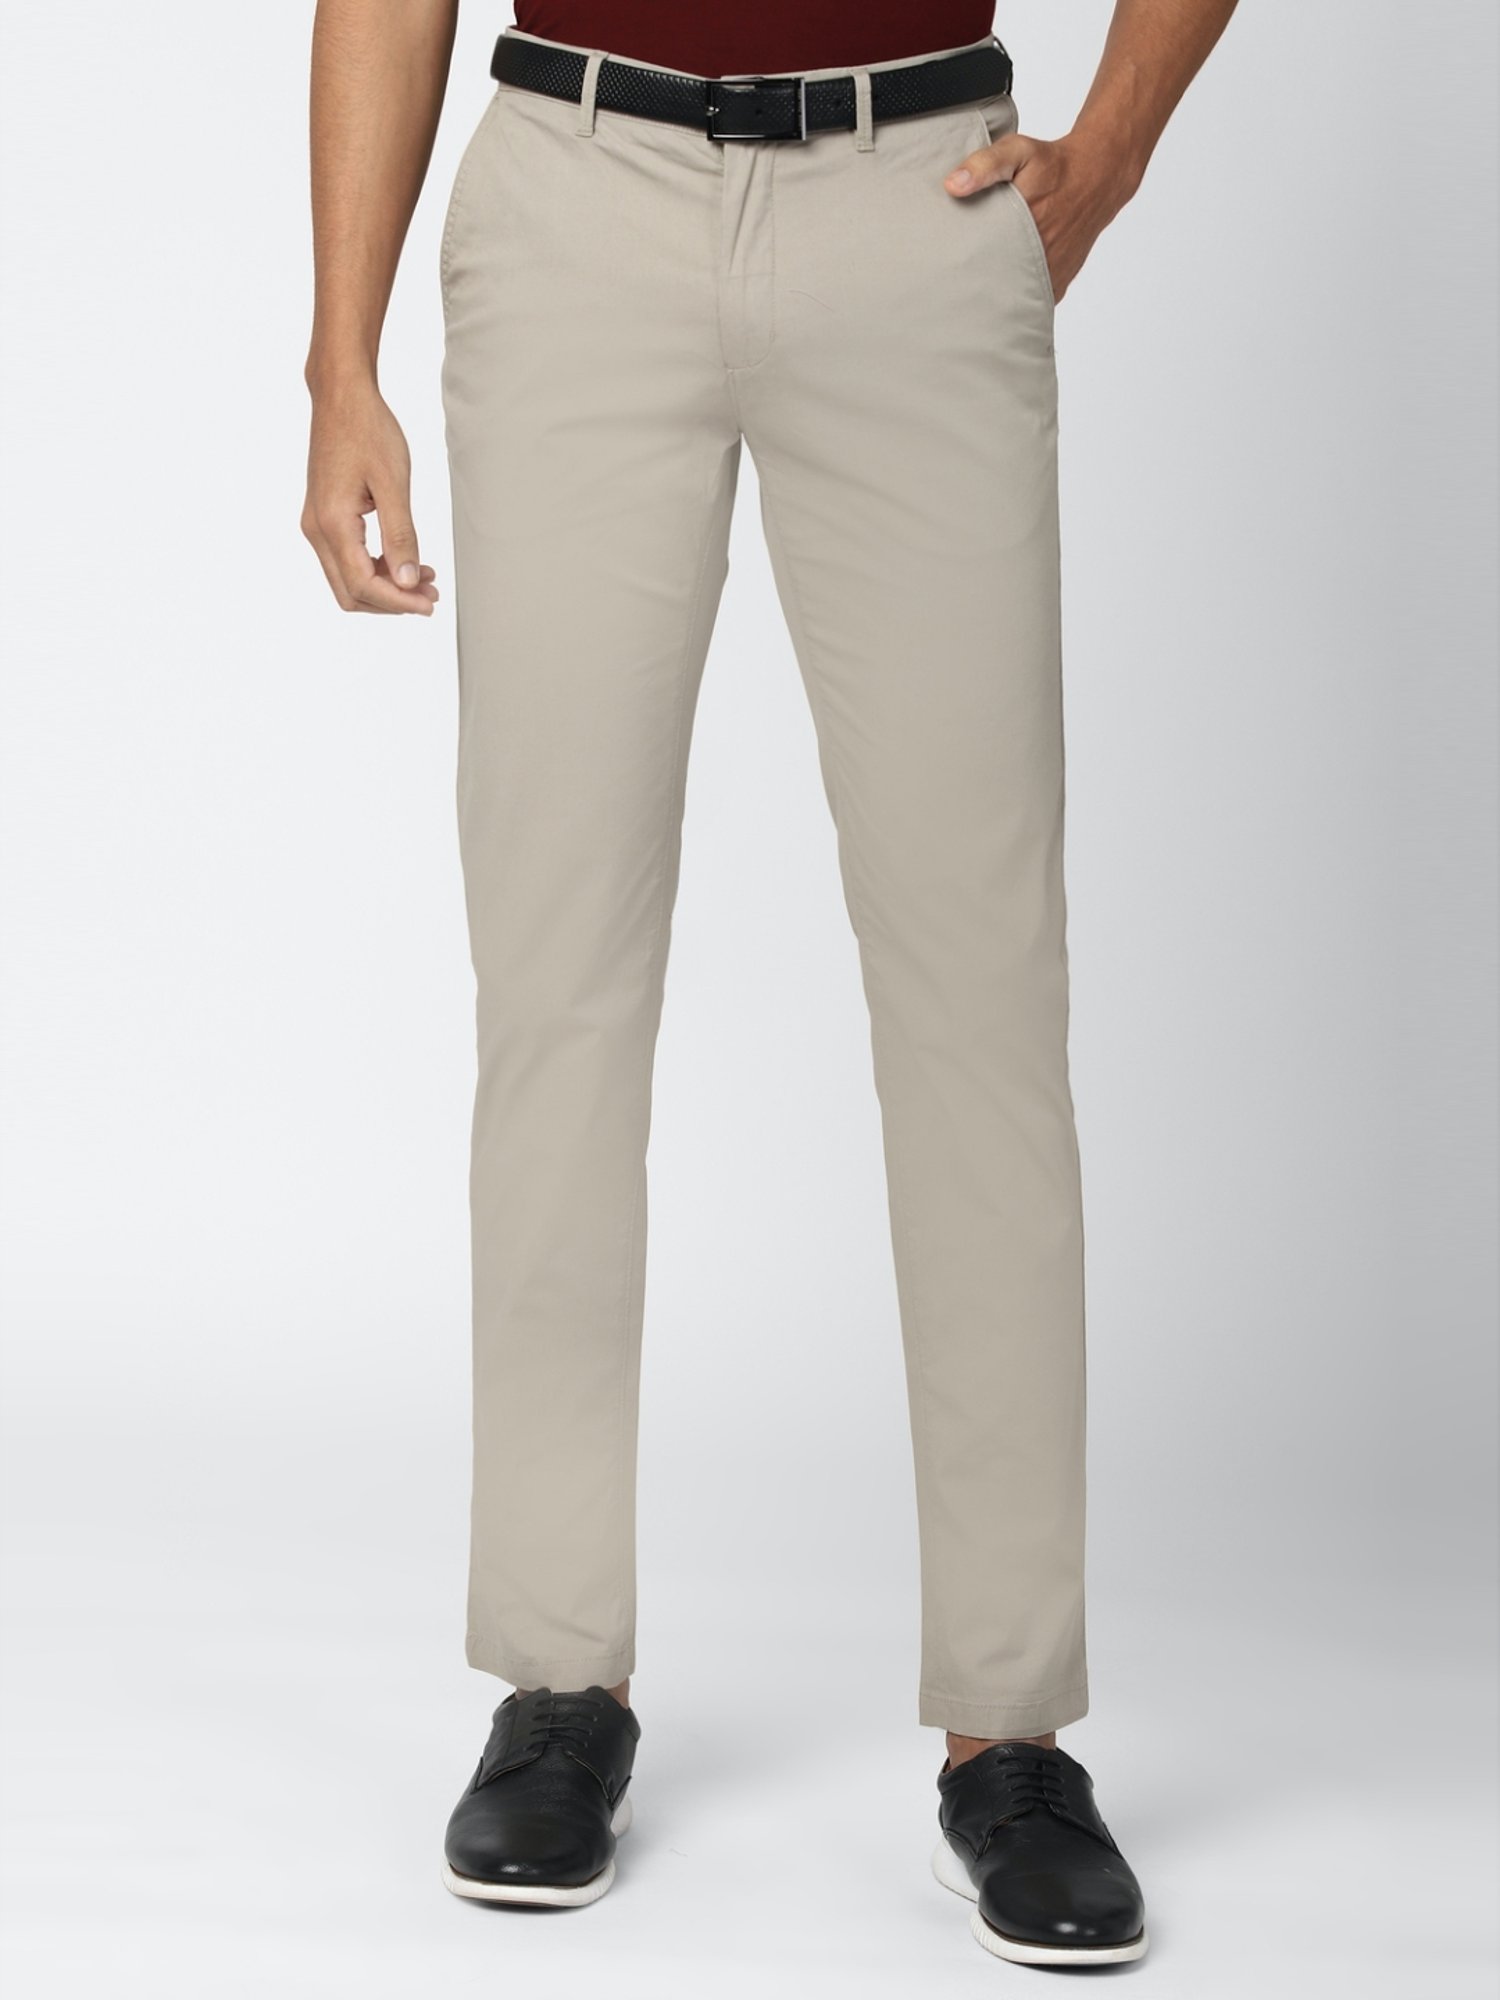 Peter England Casuals Formal Trousers : Buy Peter England Casuals Khaki  Formal Trousers Online | Nykaa Fashion